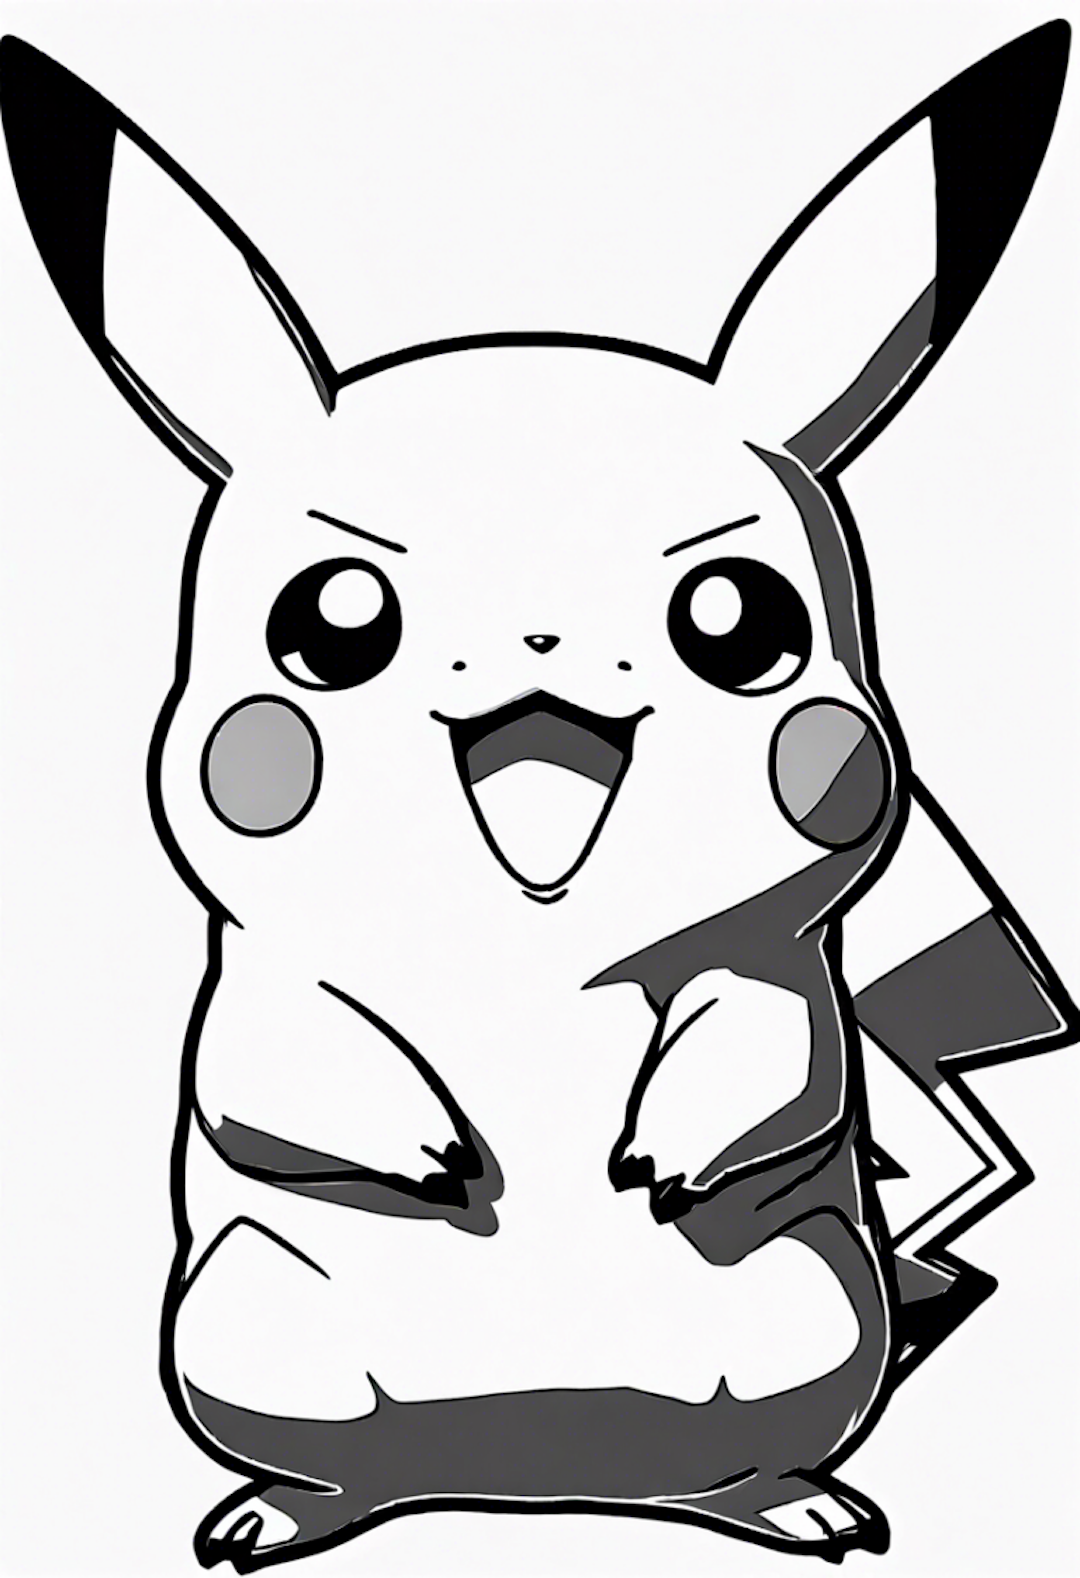 Pikachu’s Happy Day Coloring Page coloring pages